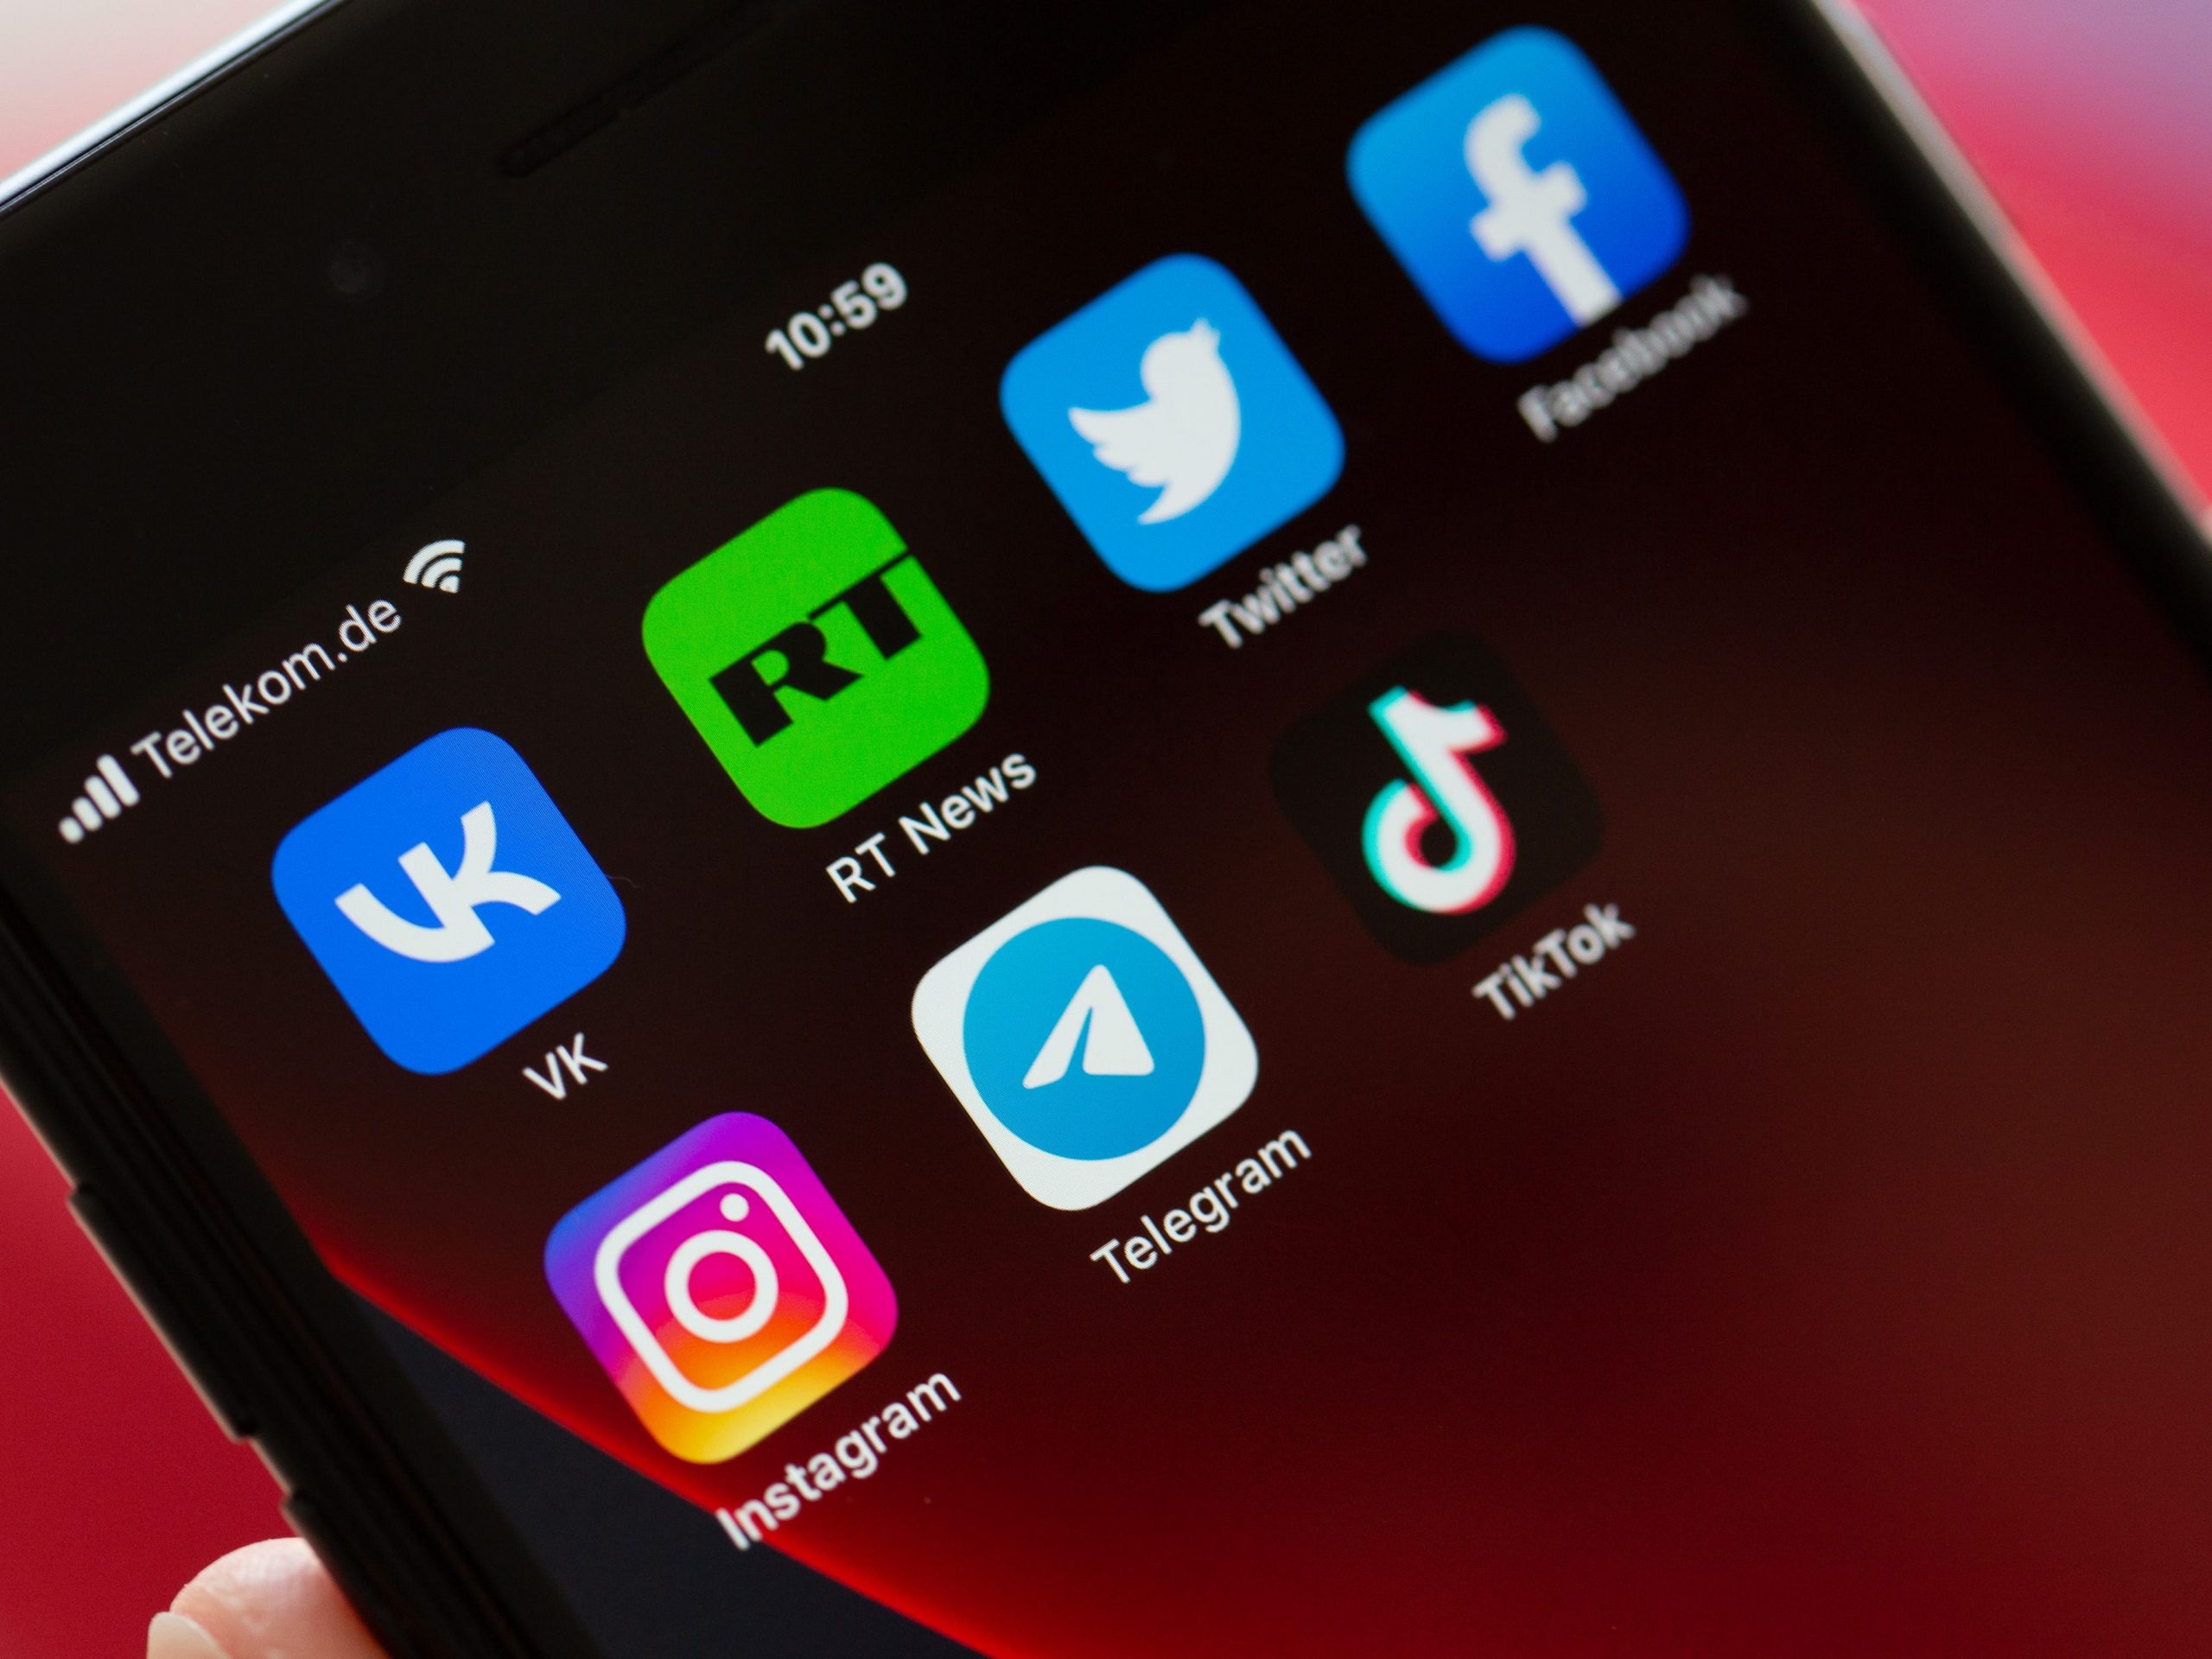 TikTok (rightmost icon in the second row) has said that it would ban Russia-backed news outlets such as RT (icon in the first row, second from left) from its platform in the EU. In this picture, the screen of a smartphone shows the logos of the apps VKontakte, Twitter, RT News, Facebook, Instagram, Telegram and TikTok